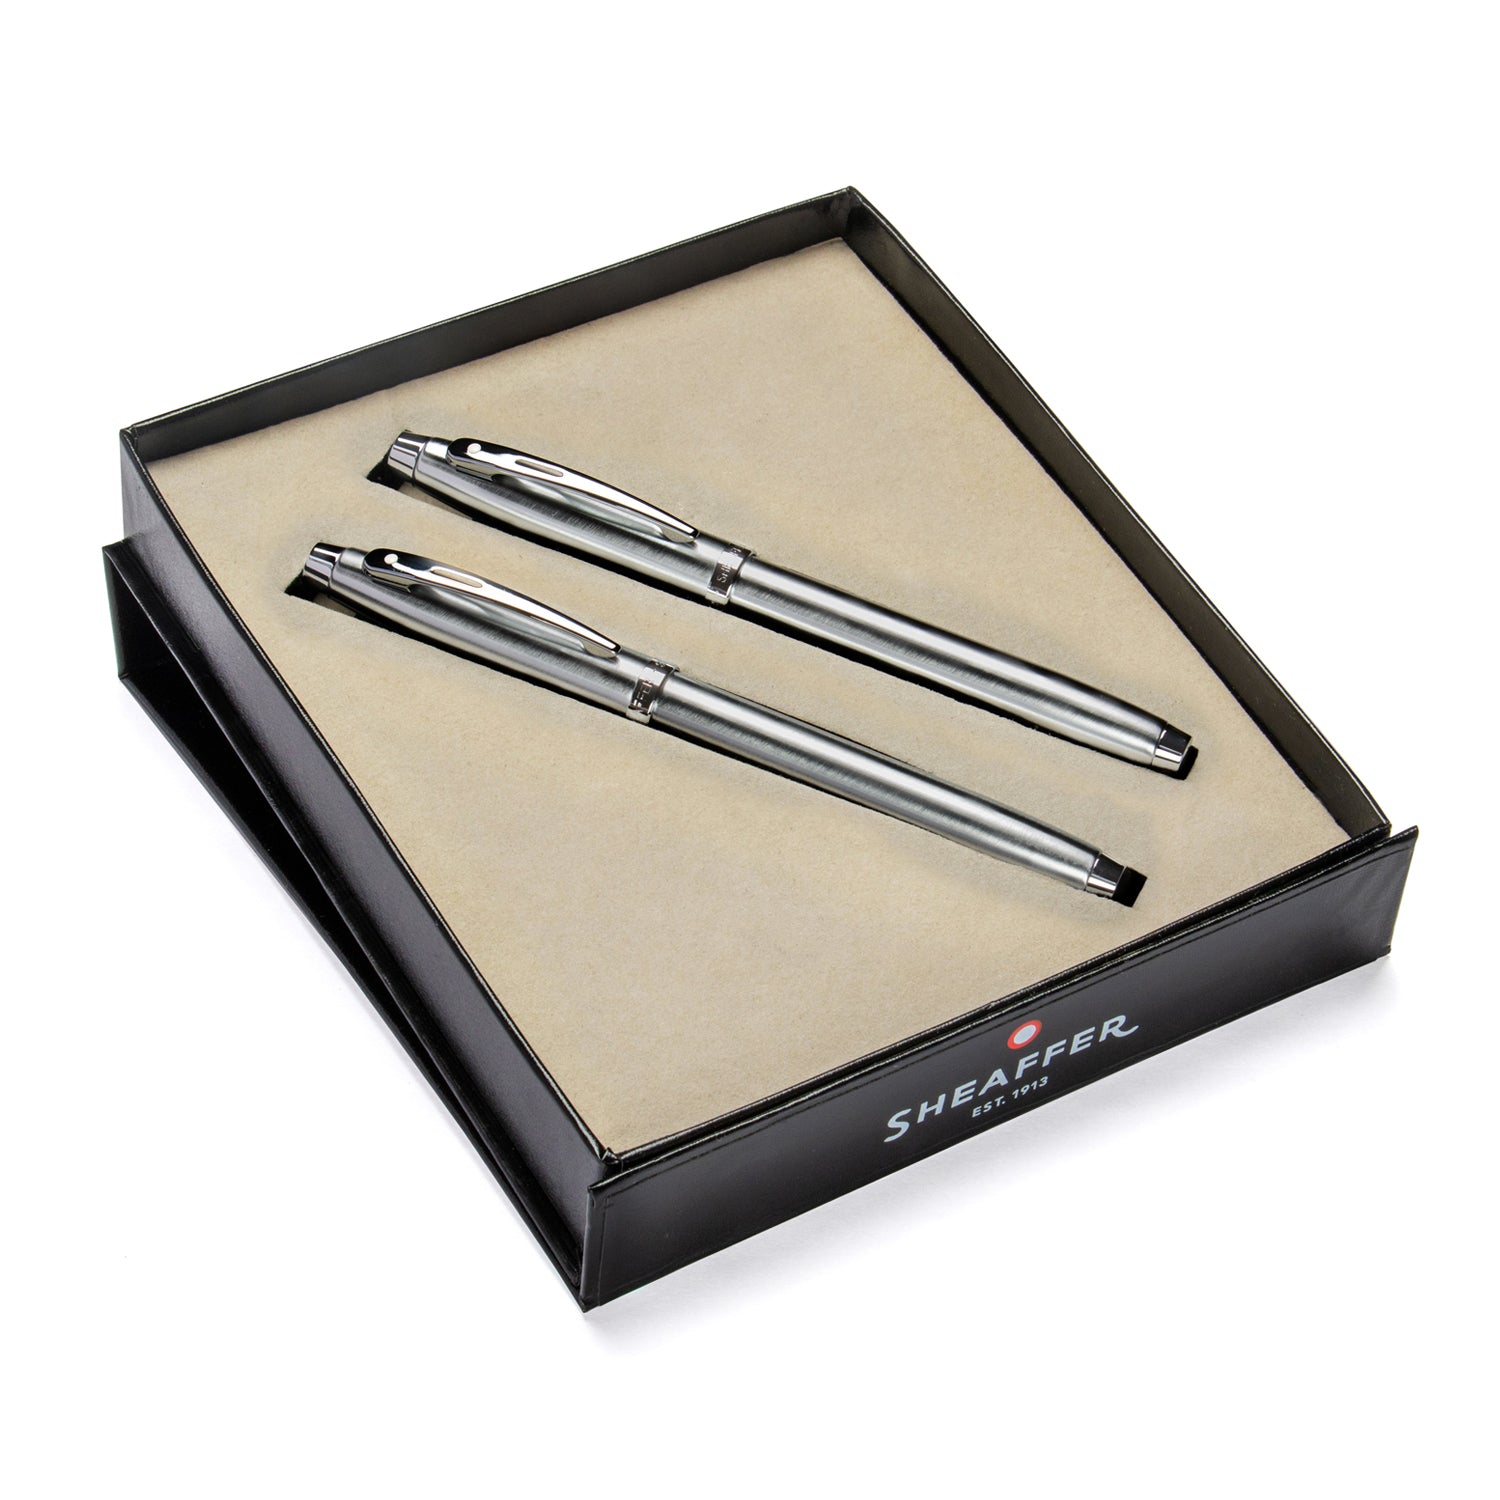 Sheaffer® Gift Set ft. Brushed Chrome S100 9306 with Chrome Trim as Set of 2 pens -  Rollerball Pen & Fountain pen (M)